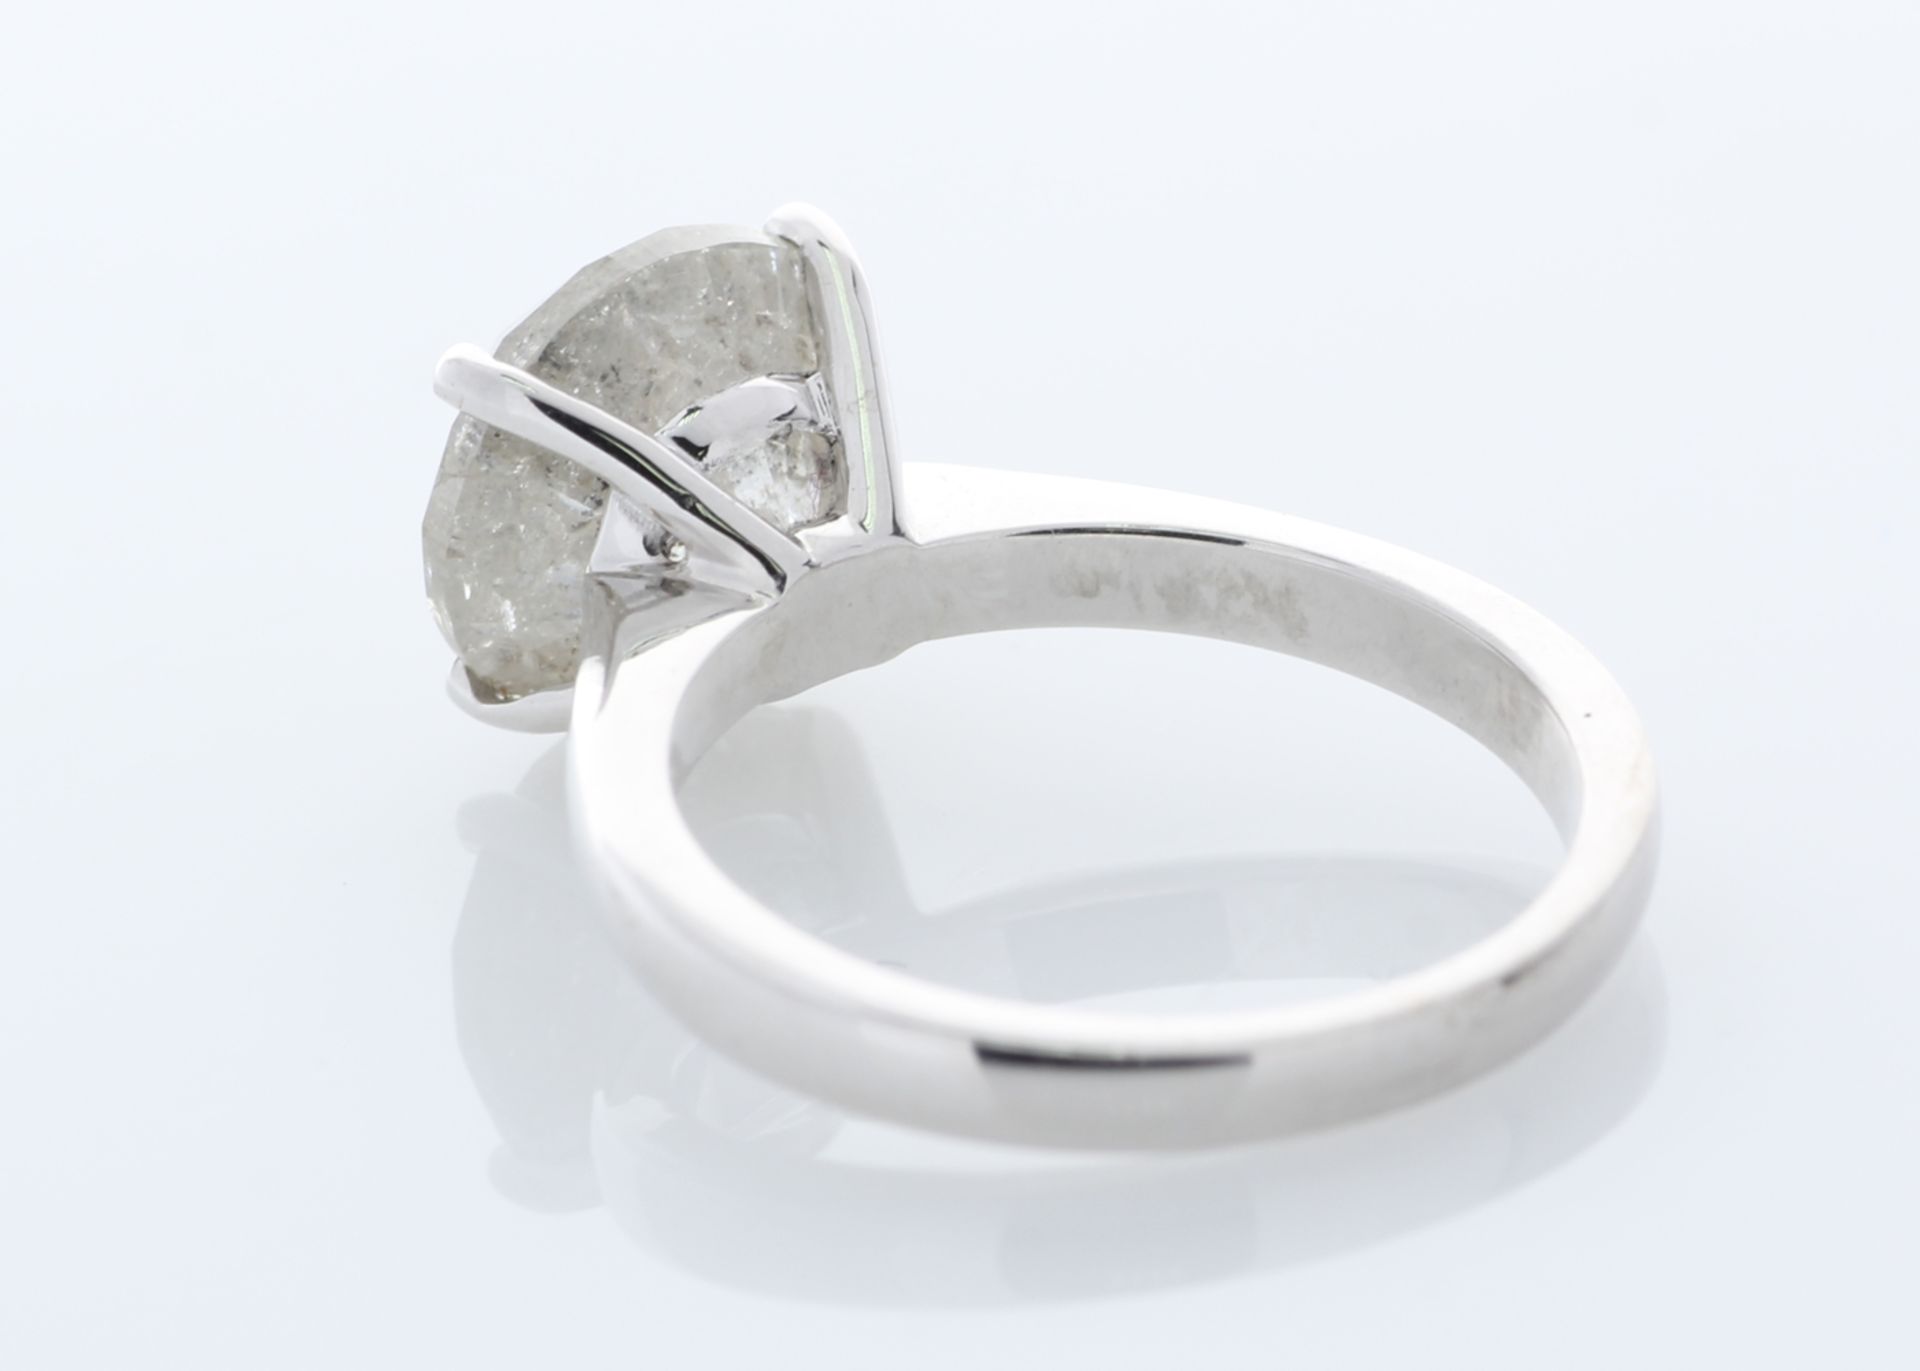 18ct White Gold Single Stone Prong Set Diamond Ring 5.00 Carats - Valued By GIE £56,150.00 - A - Image 4 of 8